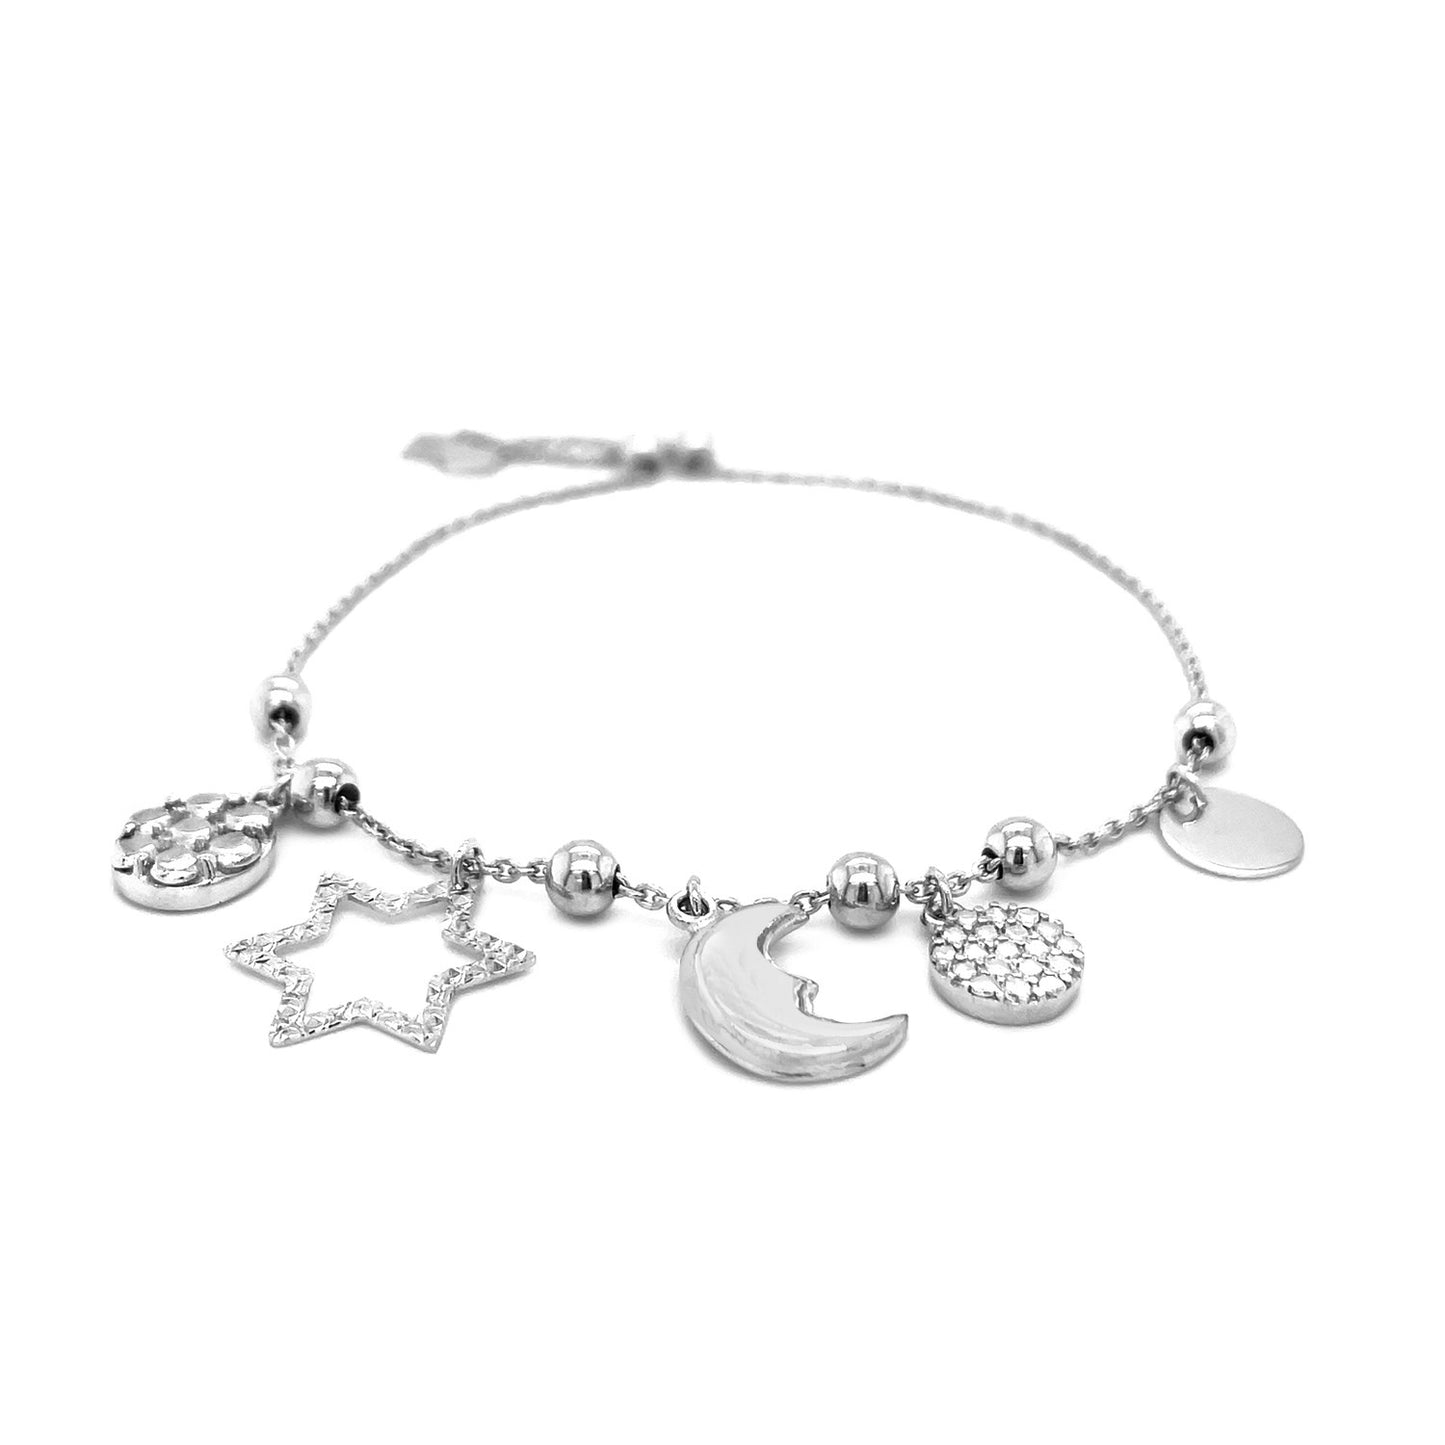 Adjustable Bead Bracelet with Celestial Charms in Sterling Silver